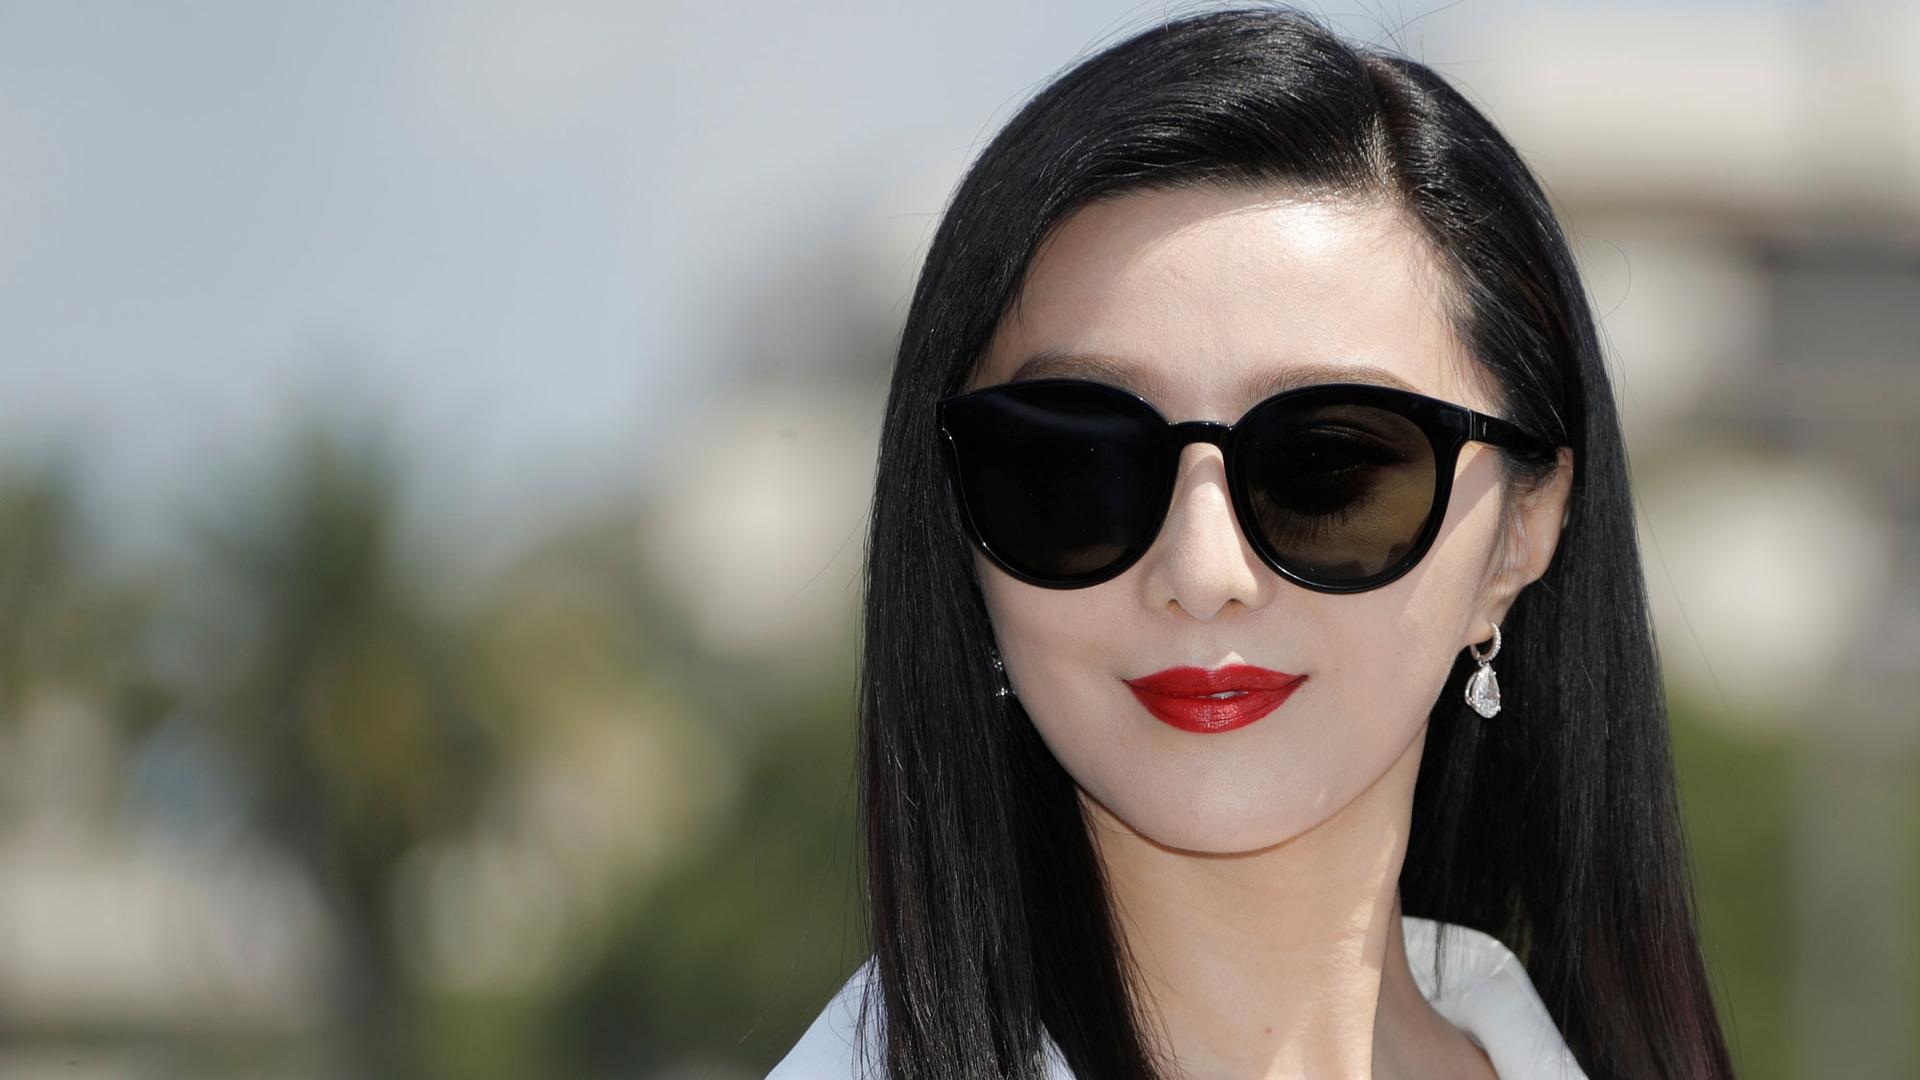 Fan Bingbing is shown in a close-up portrait photo with dark sunglasses on.